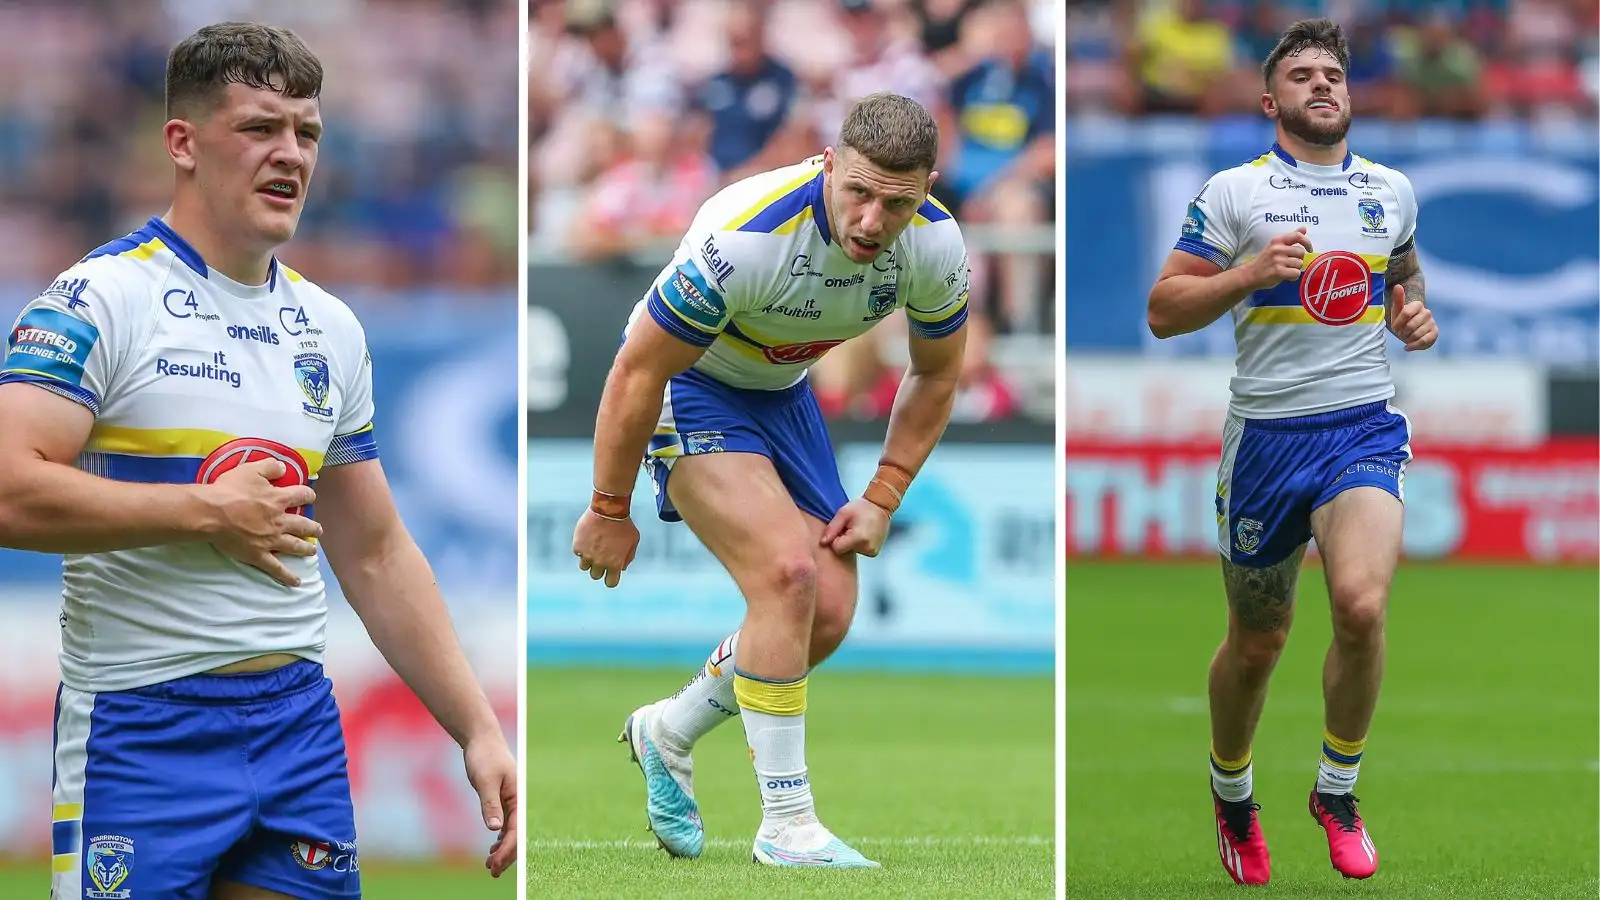 Warrington Wolves players Josh Thewlis (left), George Williams (middle) and Connor Wrench (right).